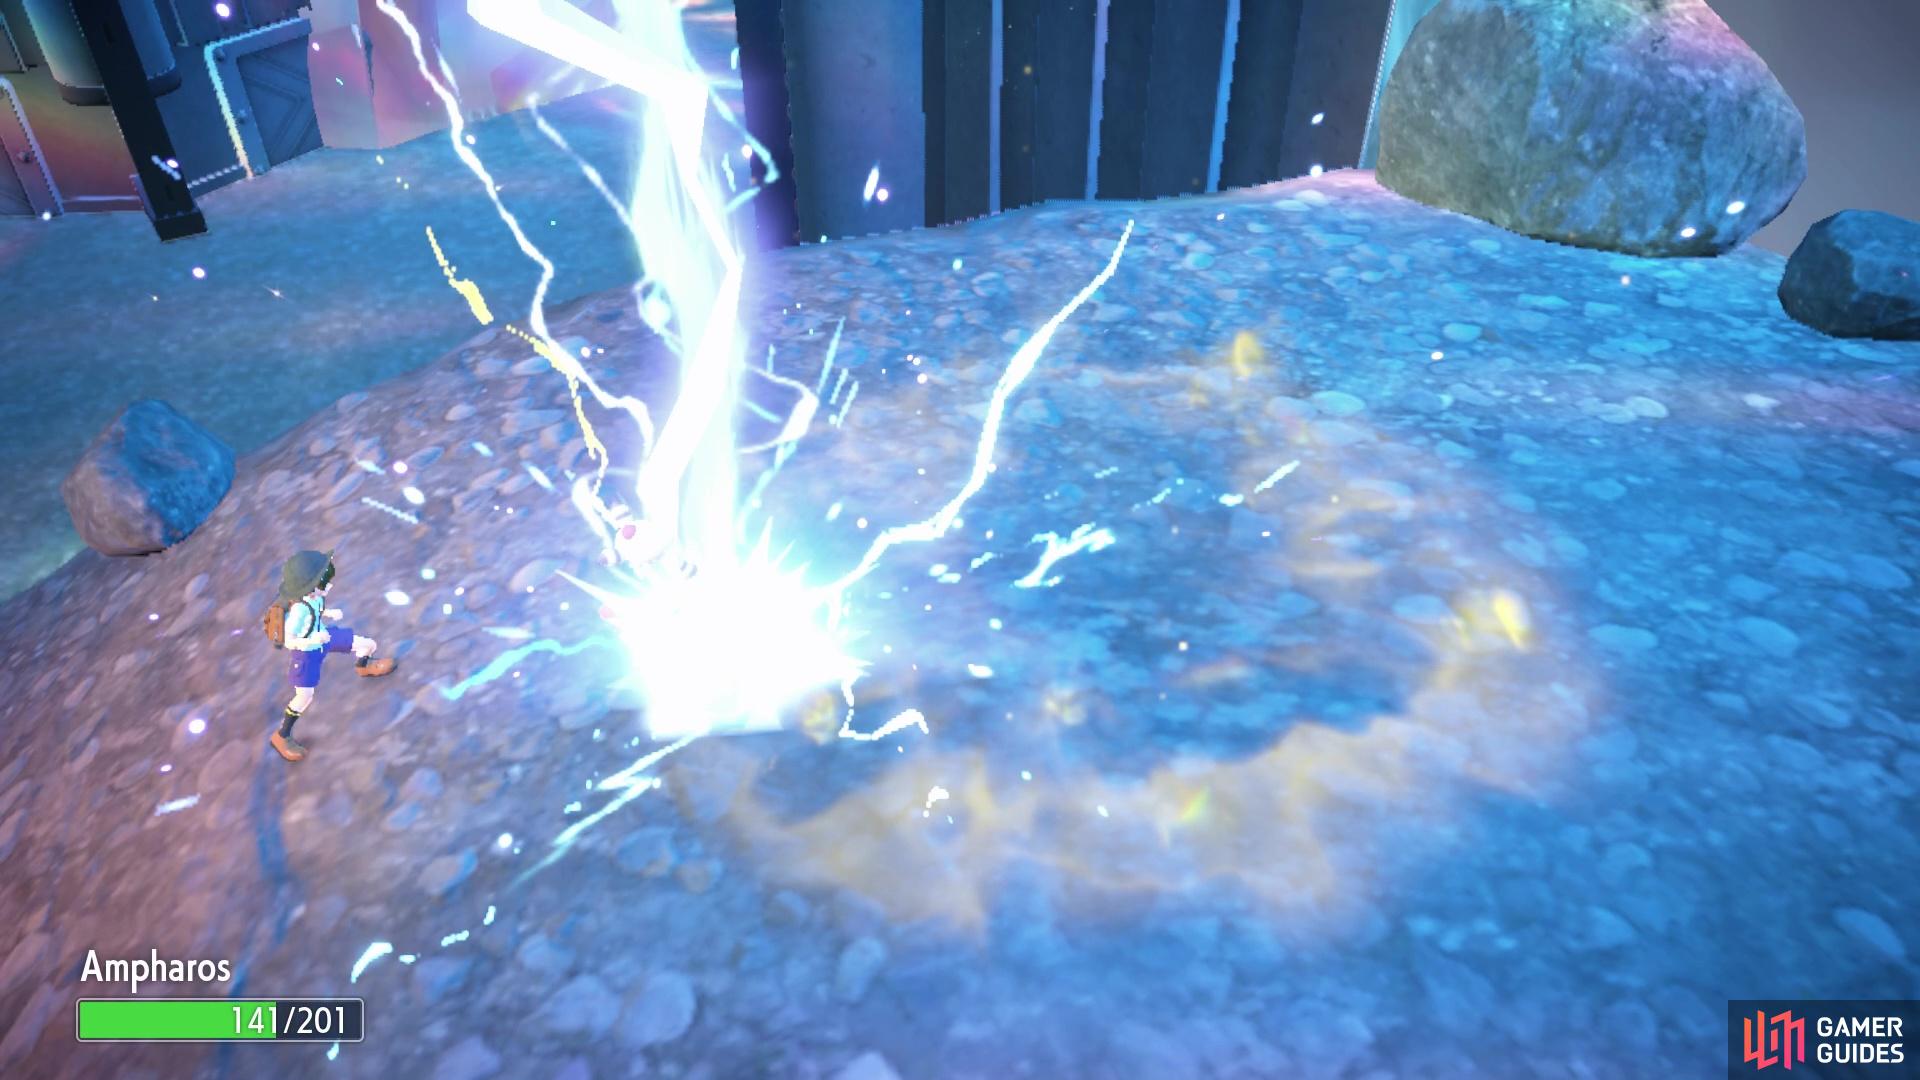 Electro drift is a pretty nasty ability and can be boosted by Charge to make it even stronger!